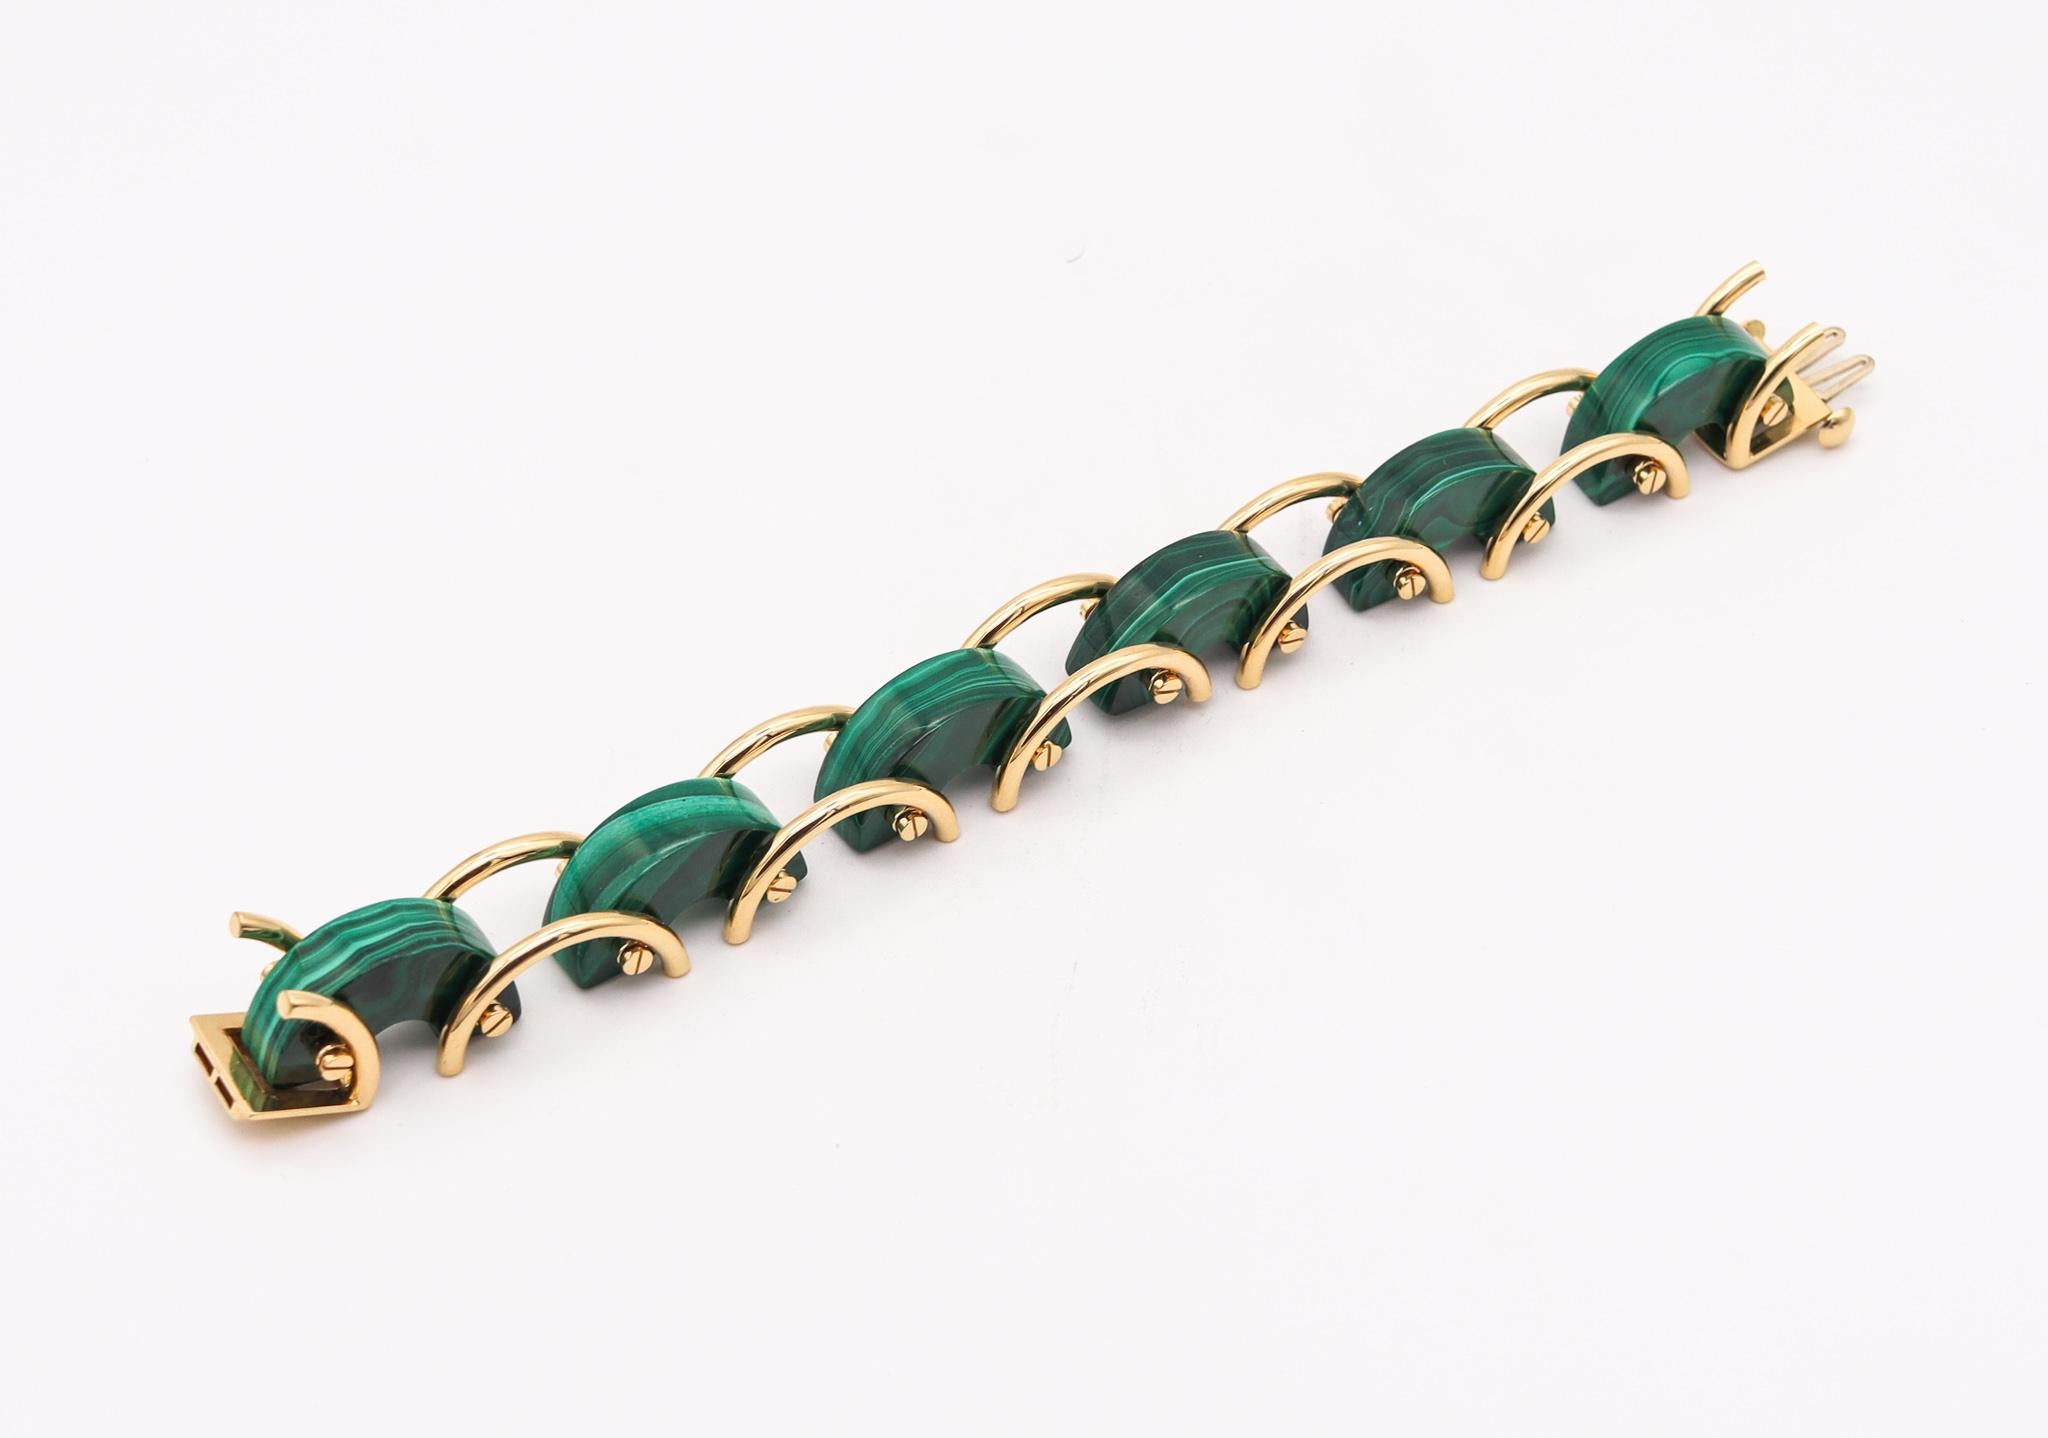 Aletto Brothers Sculptural Bracelet in 18Kt Yellow Gold with Carved Malachite For Sale 1